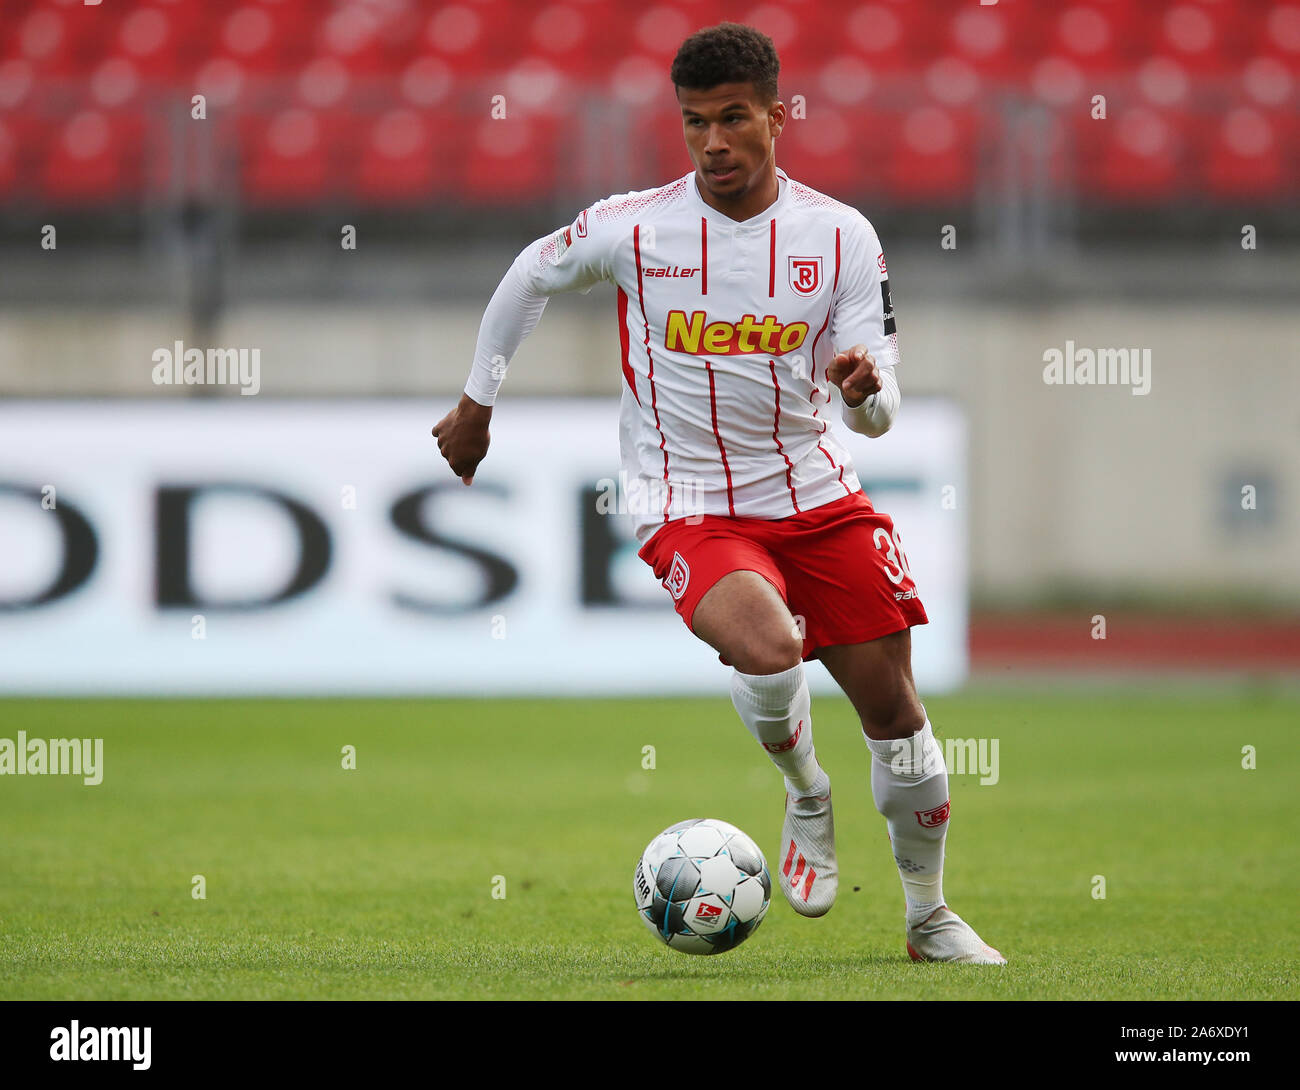 Nuremberg, Germany. 27th Oct, 2019. Soccer: 2nd Bundesliga, 1st FC Nuremberg - Jahn Regensburg, 11th matchday in Max Morlock Stadium. The Regensburg Chima Okoroji plays the ball. Credit: Daniel Karmann/dpa - IMPORTANT NOTE: In accordance with the requirements of the DFL Deutsche Fußball Liga or the DFB Deutscher Fußball-Bund, it is prohibited to use or have used photographs taken in the stadium and/or the match in the form of sequence images and/or video-like photo sequences./dpa/Alamy Live News Stock Photo